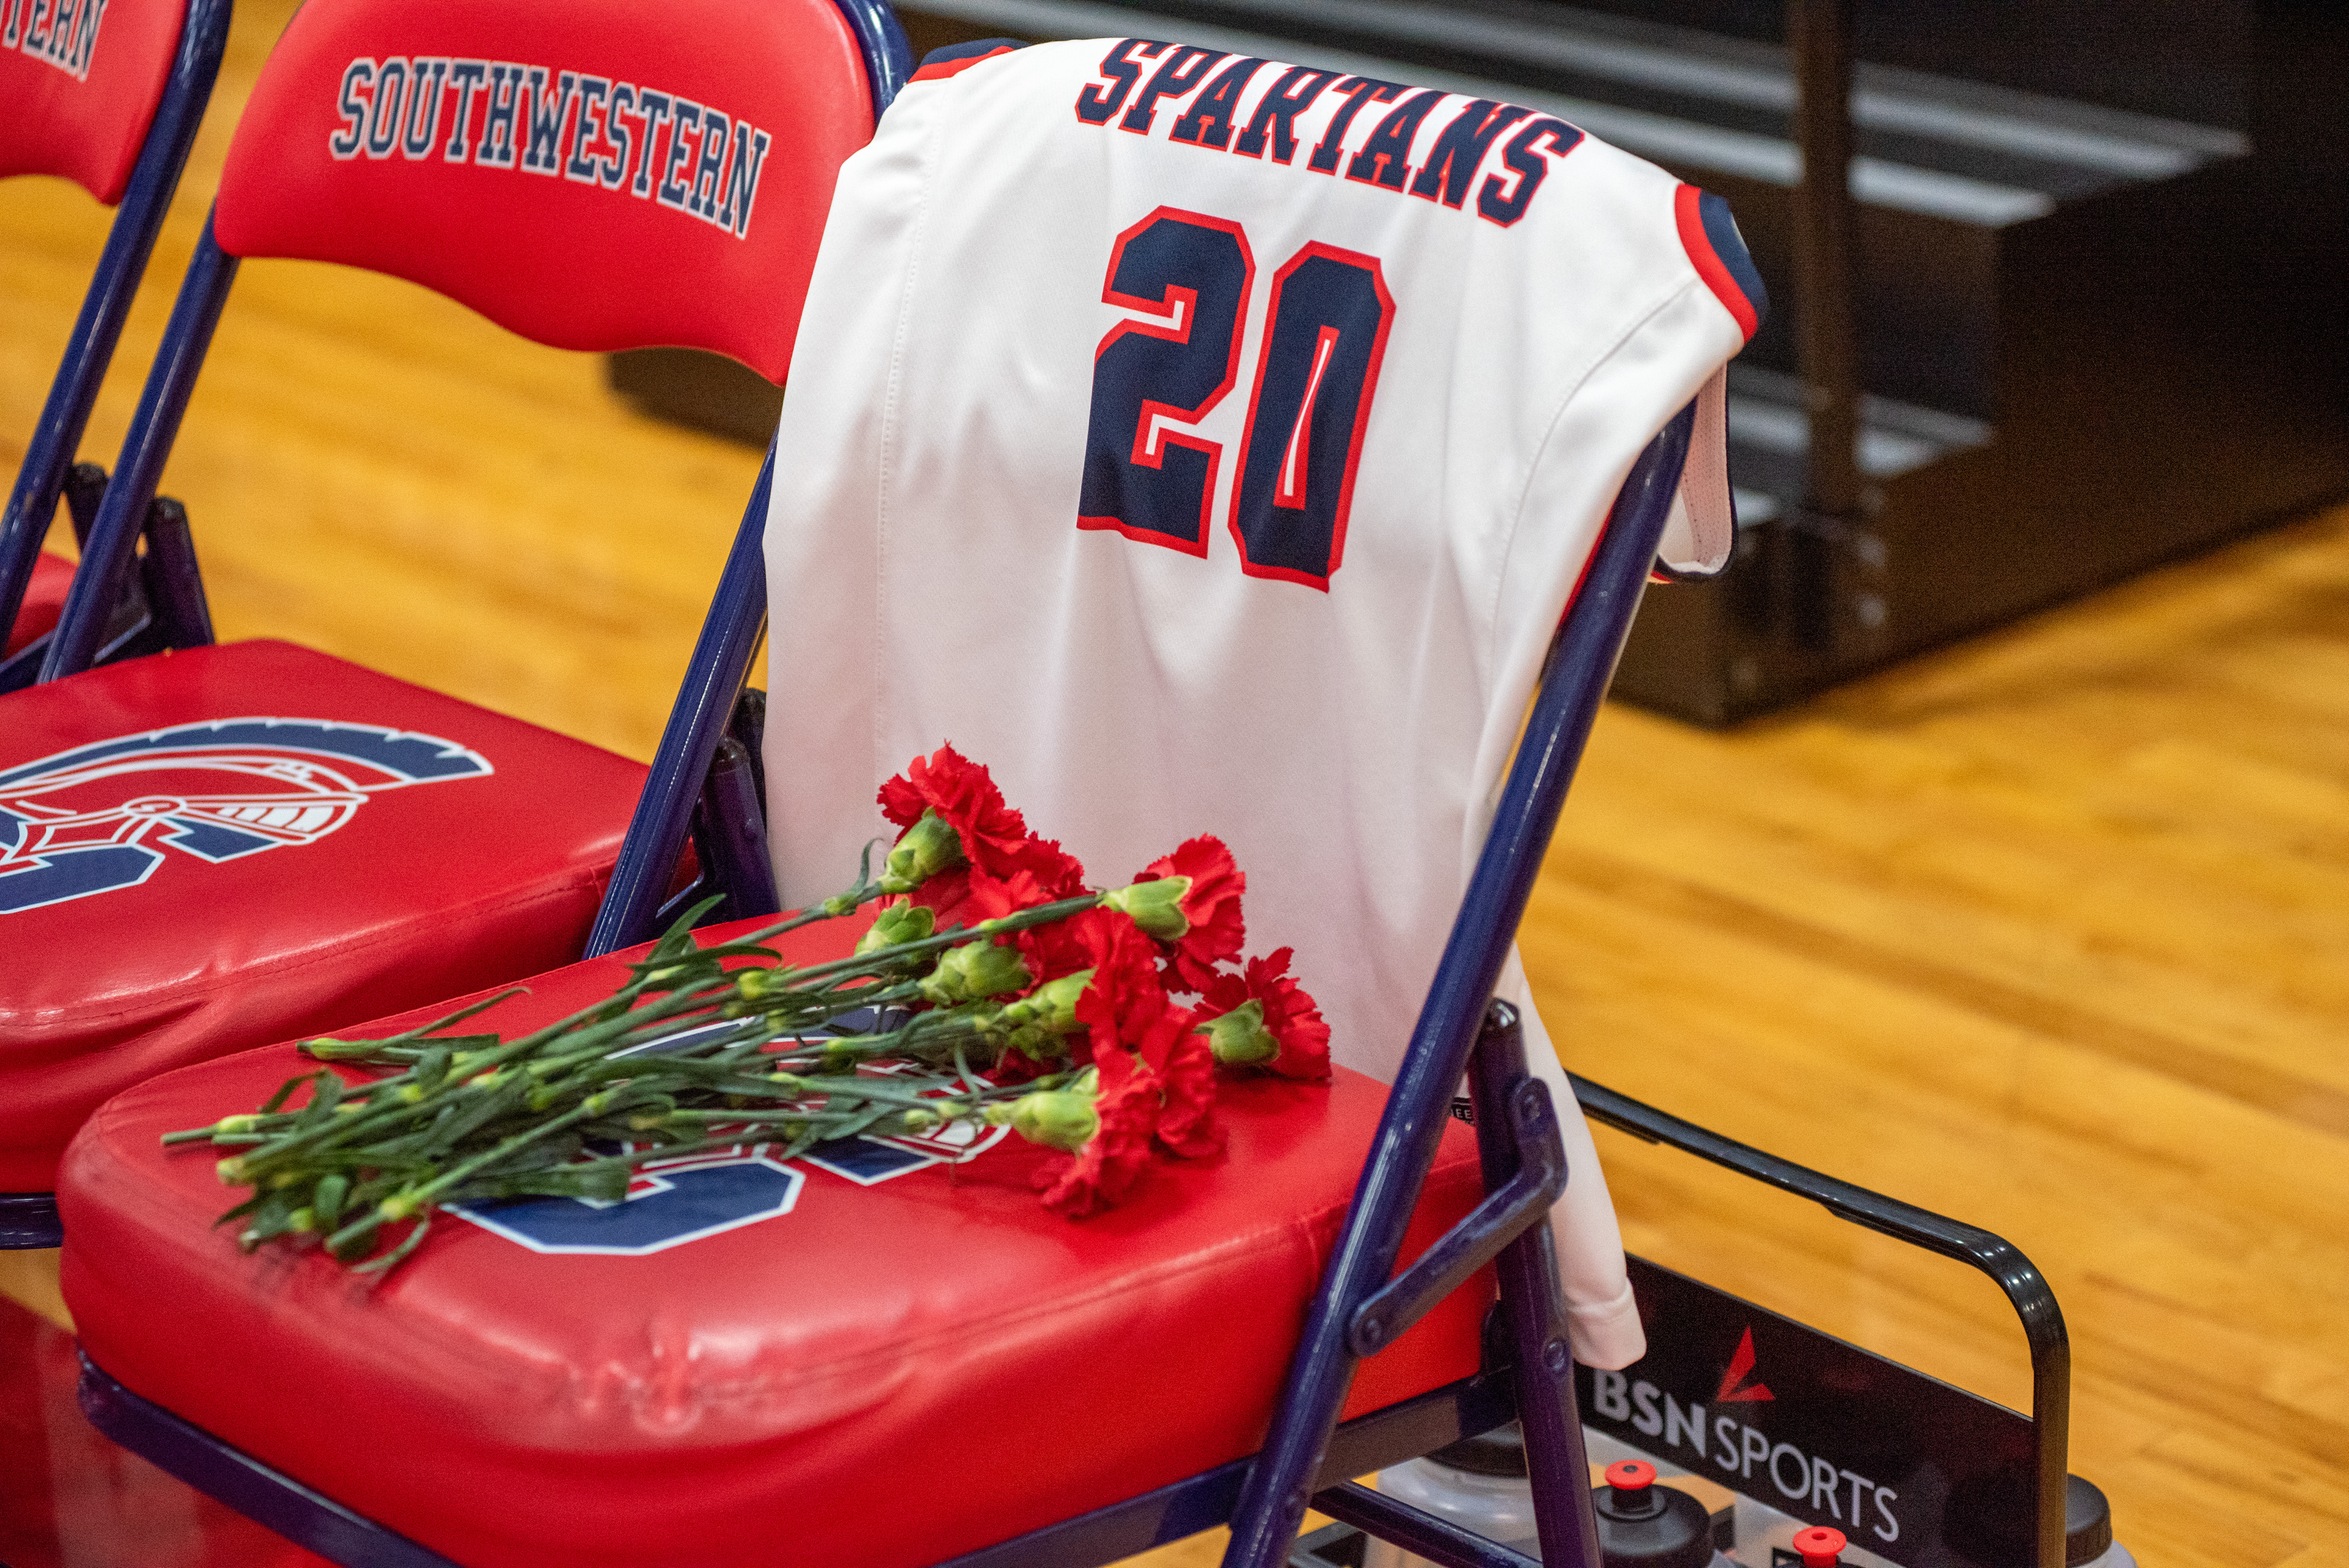 Southwestern Spartans Women's Basketball Secures Victory in Tribute Game